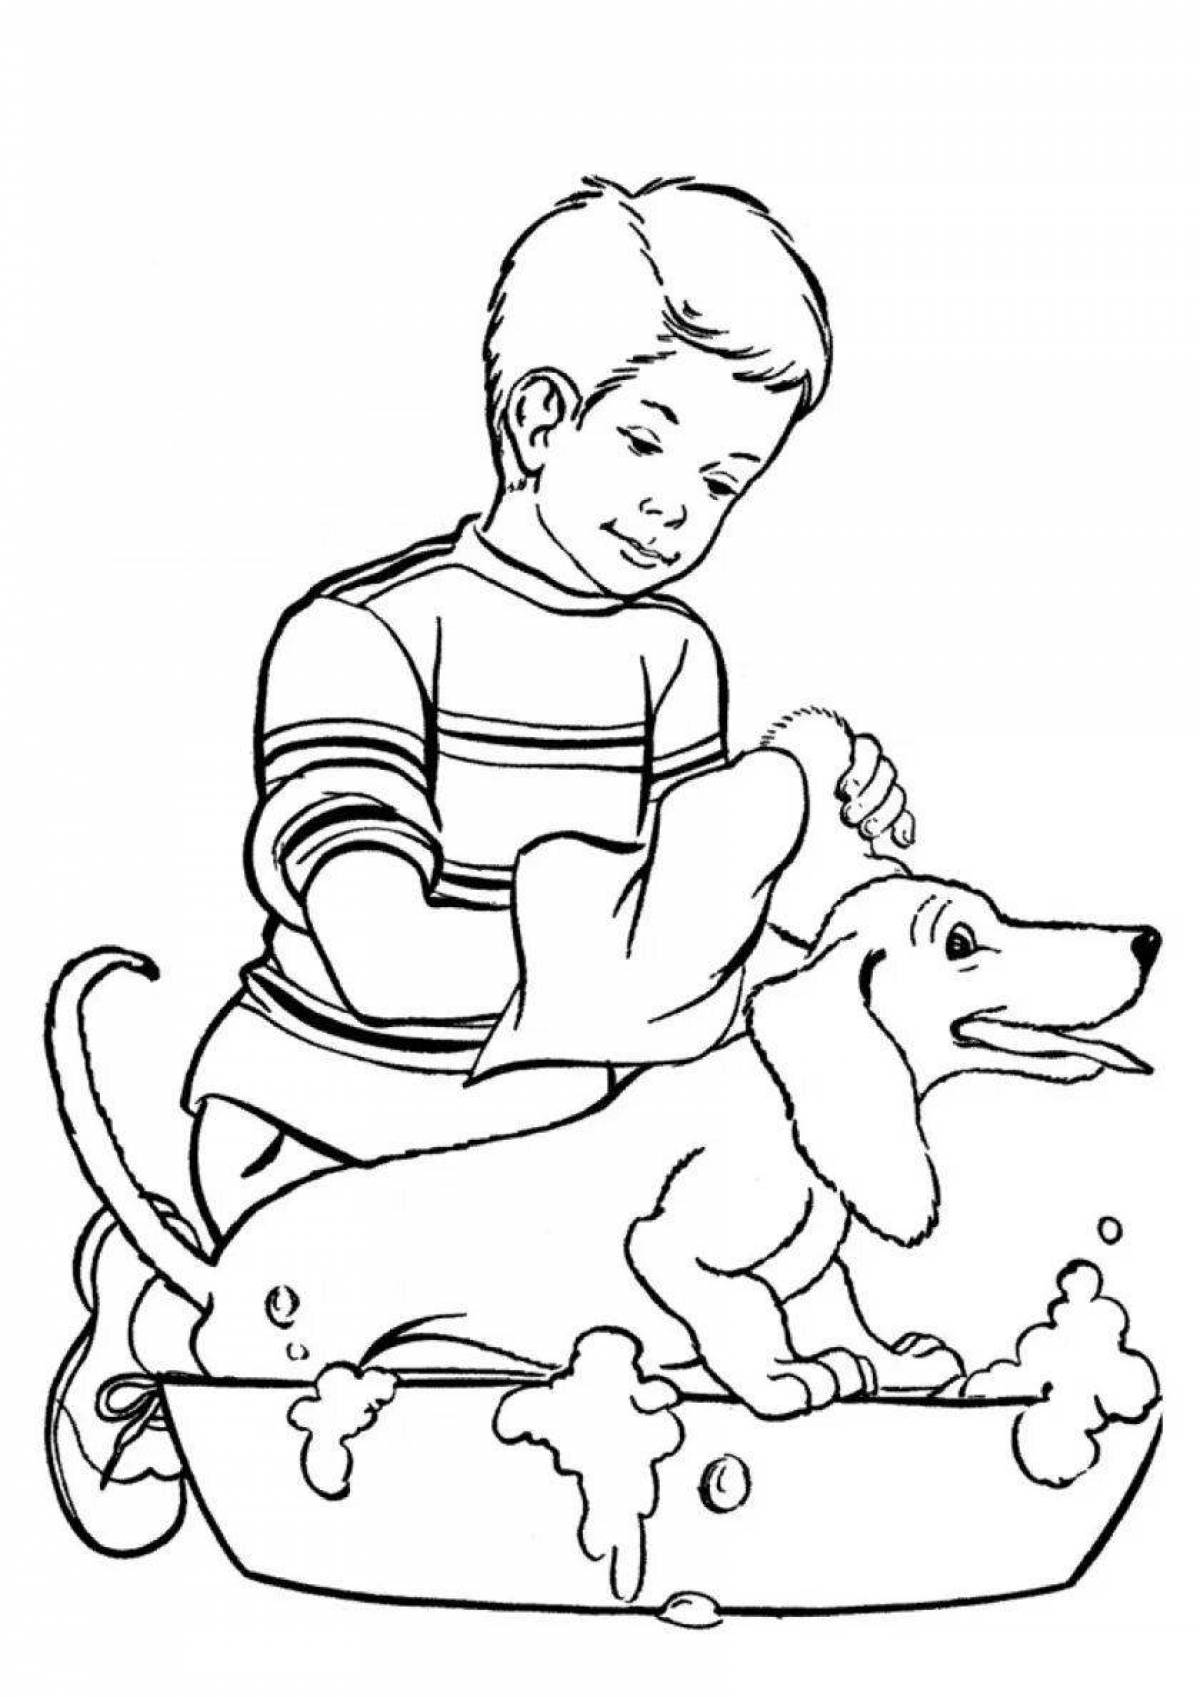 Calming care coloring page